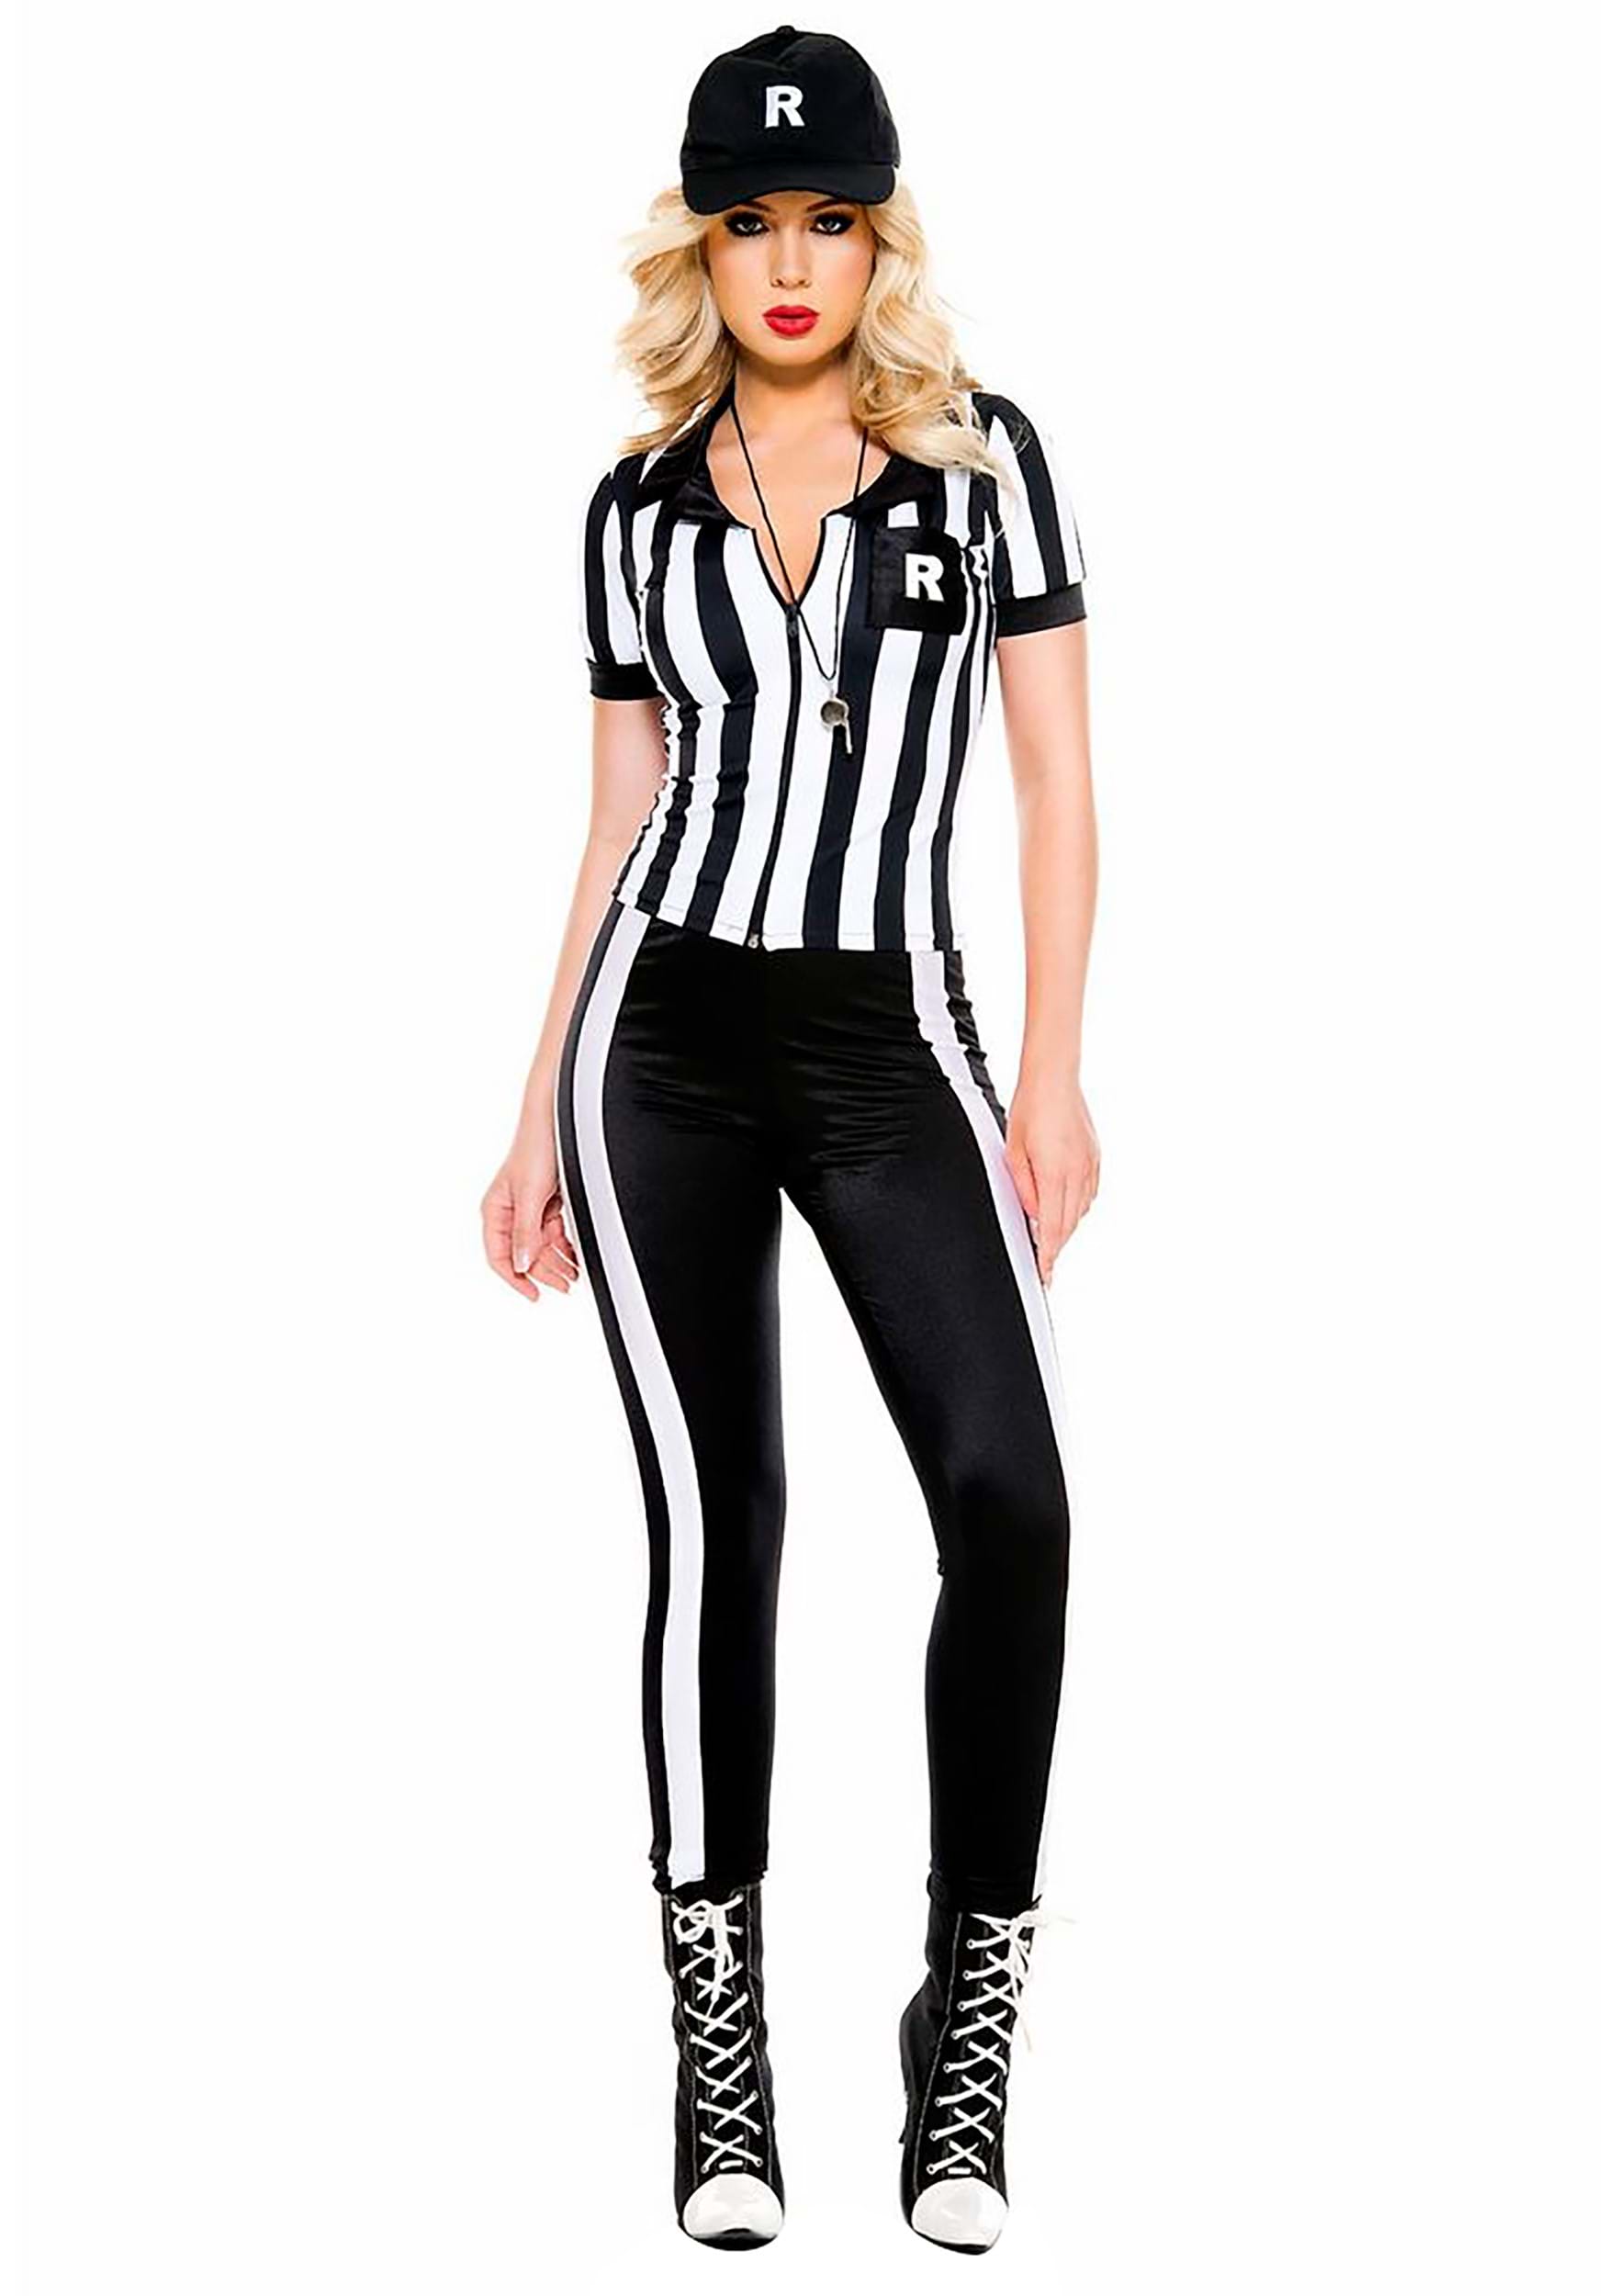 https://images.halloweencostumes.com/products/82620/1-1/womens-half-time-referee-costume.jpg